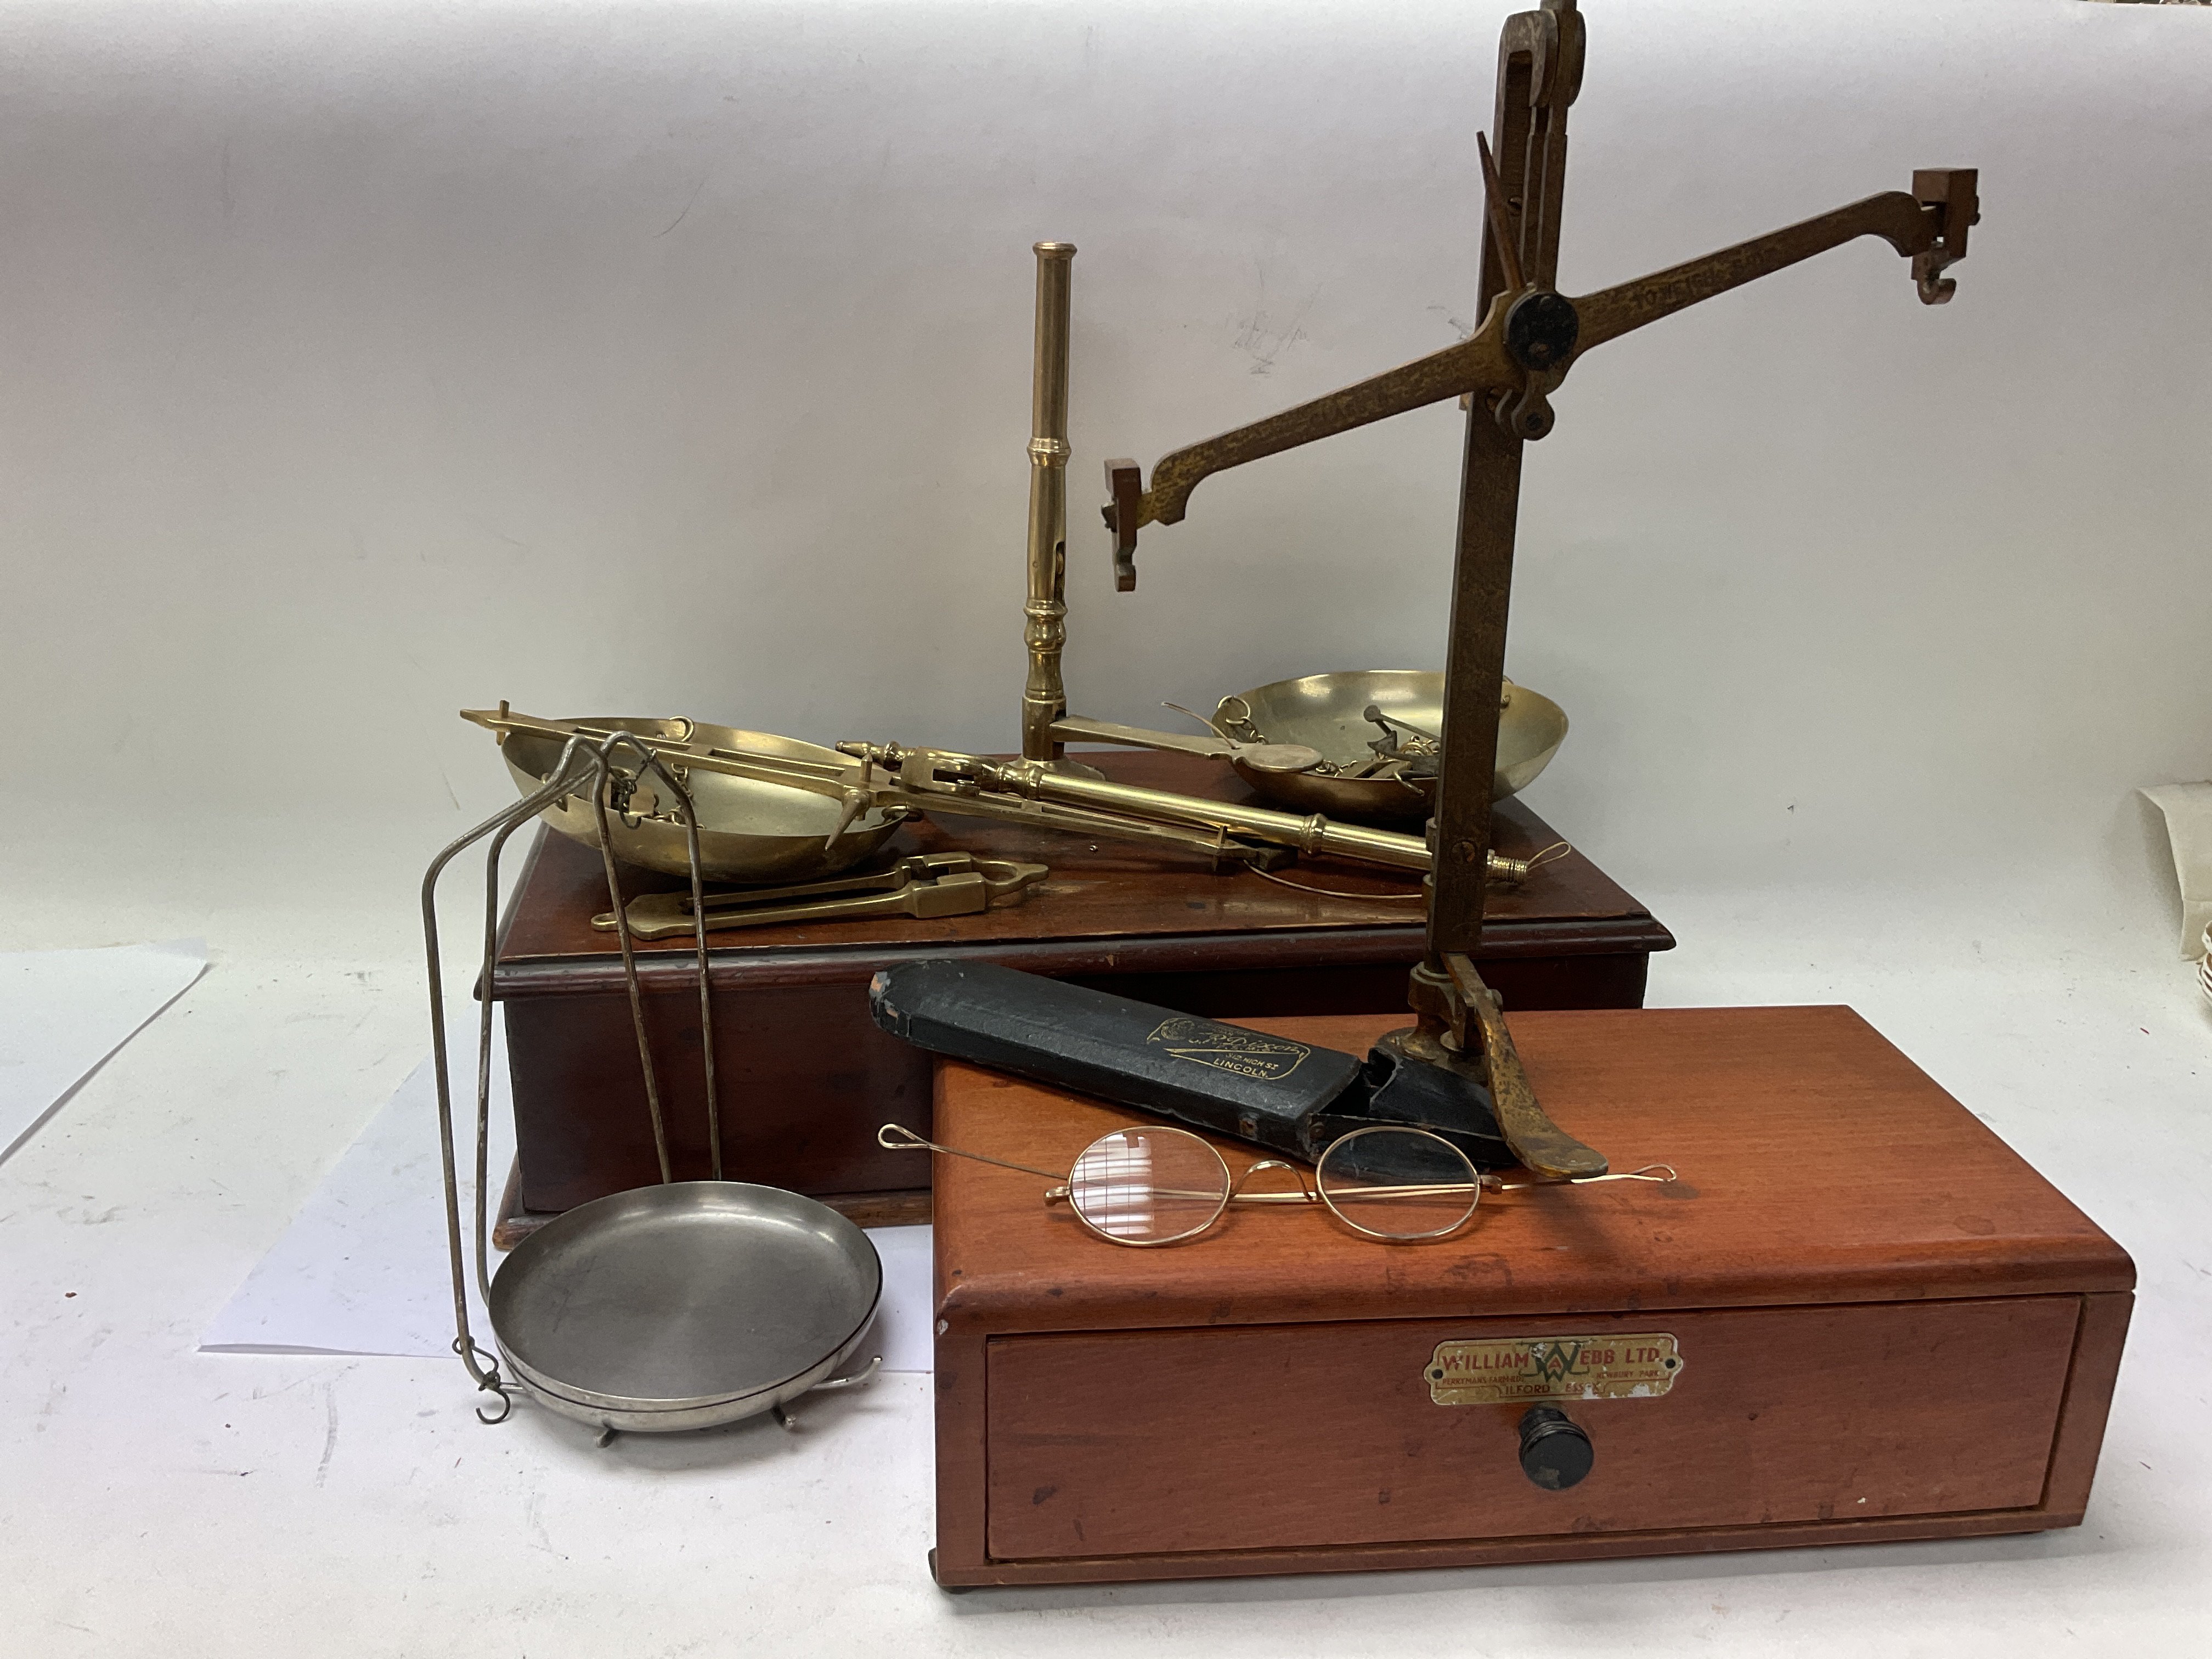 2 sets of Brass jewellery/Apothecary scales togeth